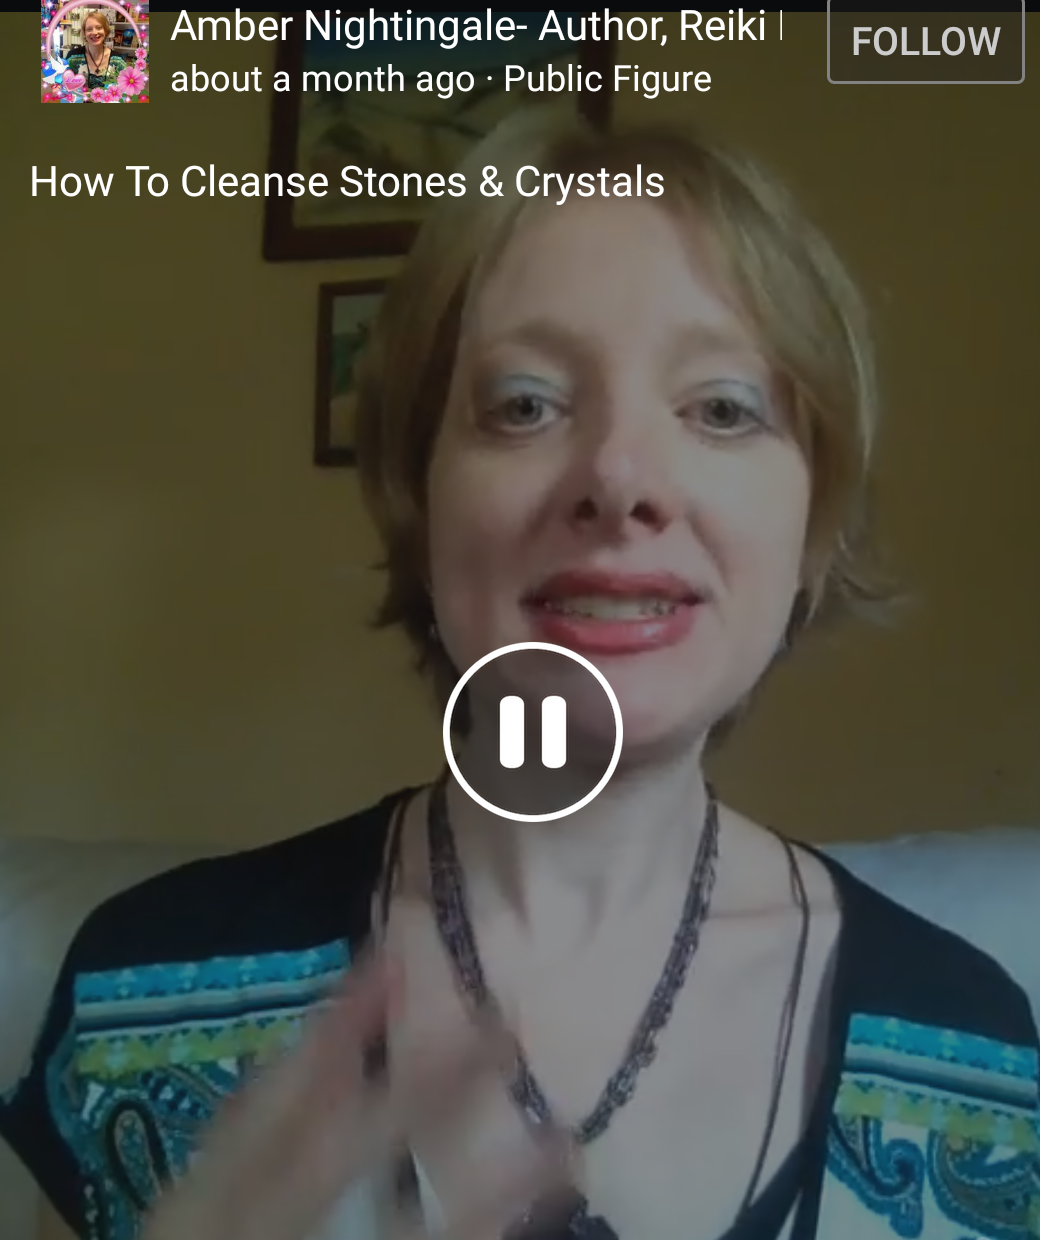 How Amber says You should clean stones & crystals